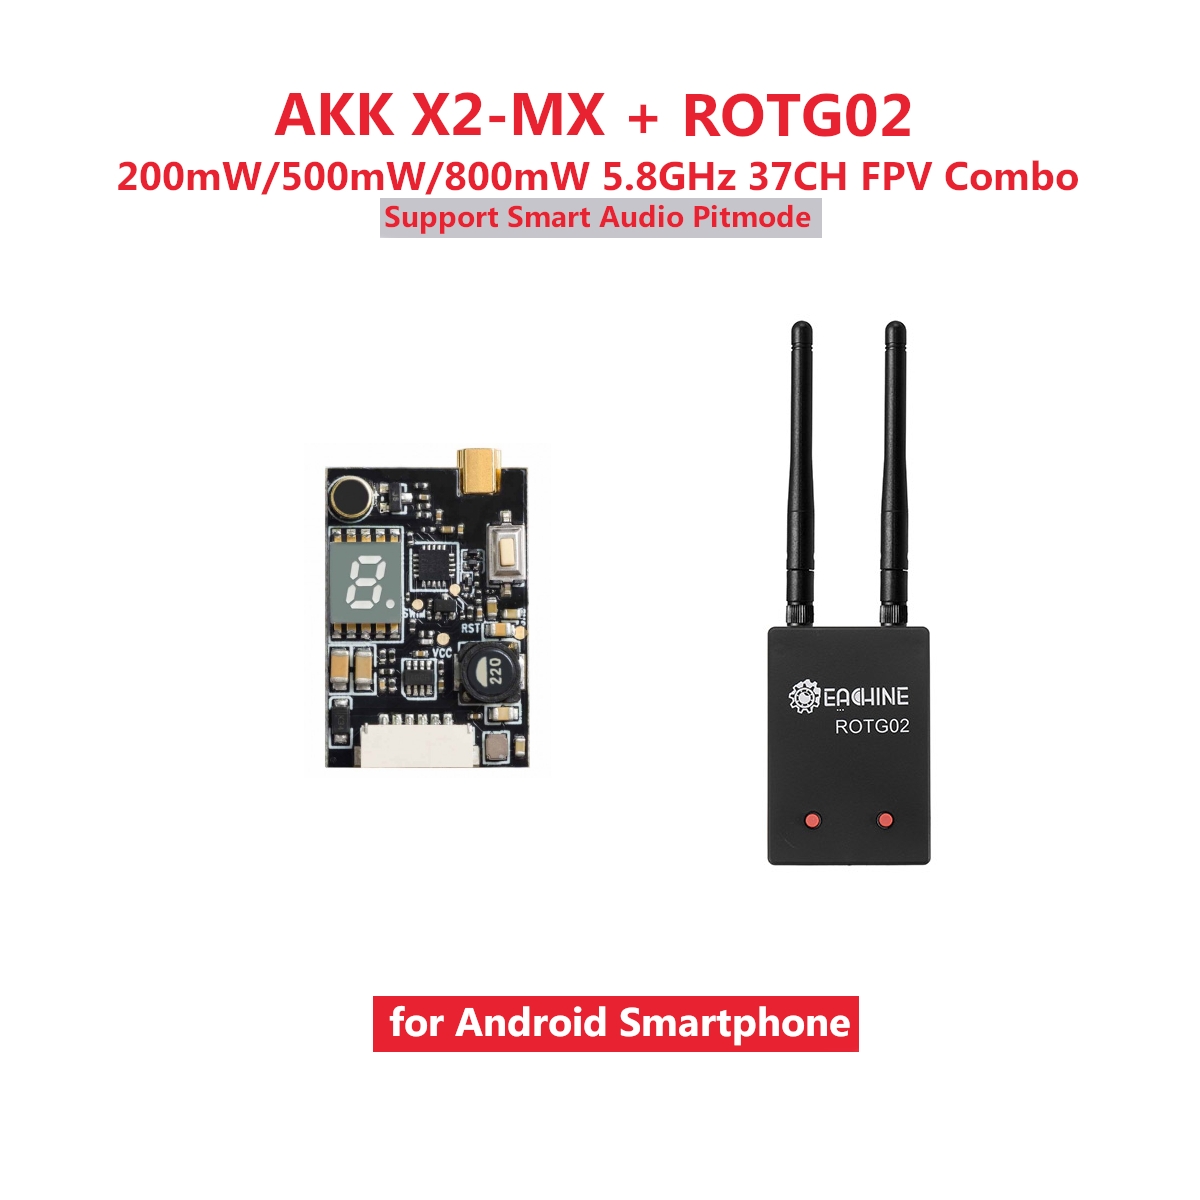 Eachine ROTG02+AKK X2-MX FPV Combo 200mW/500mW/800mW 5.8GHz 37CH Transmitter Receiver Black Support Smart Audio Pitmode for Android Phone